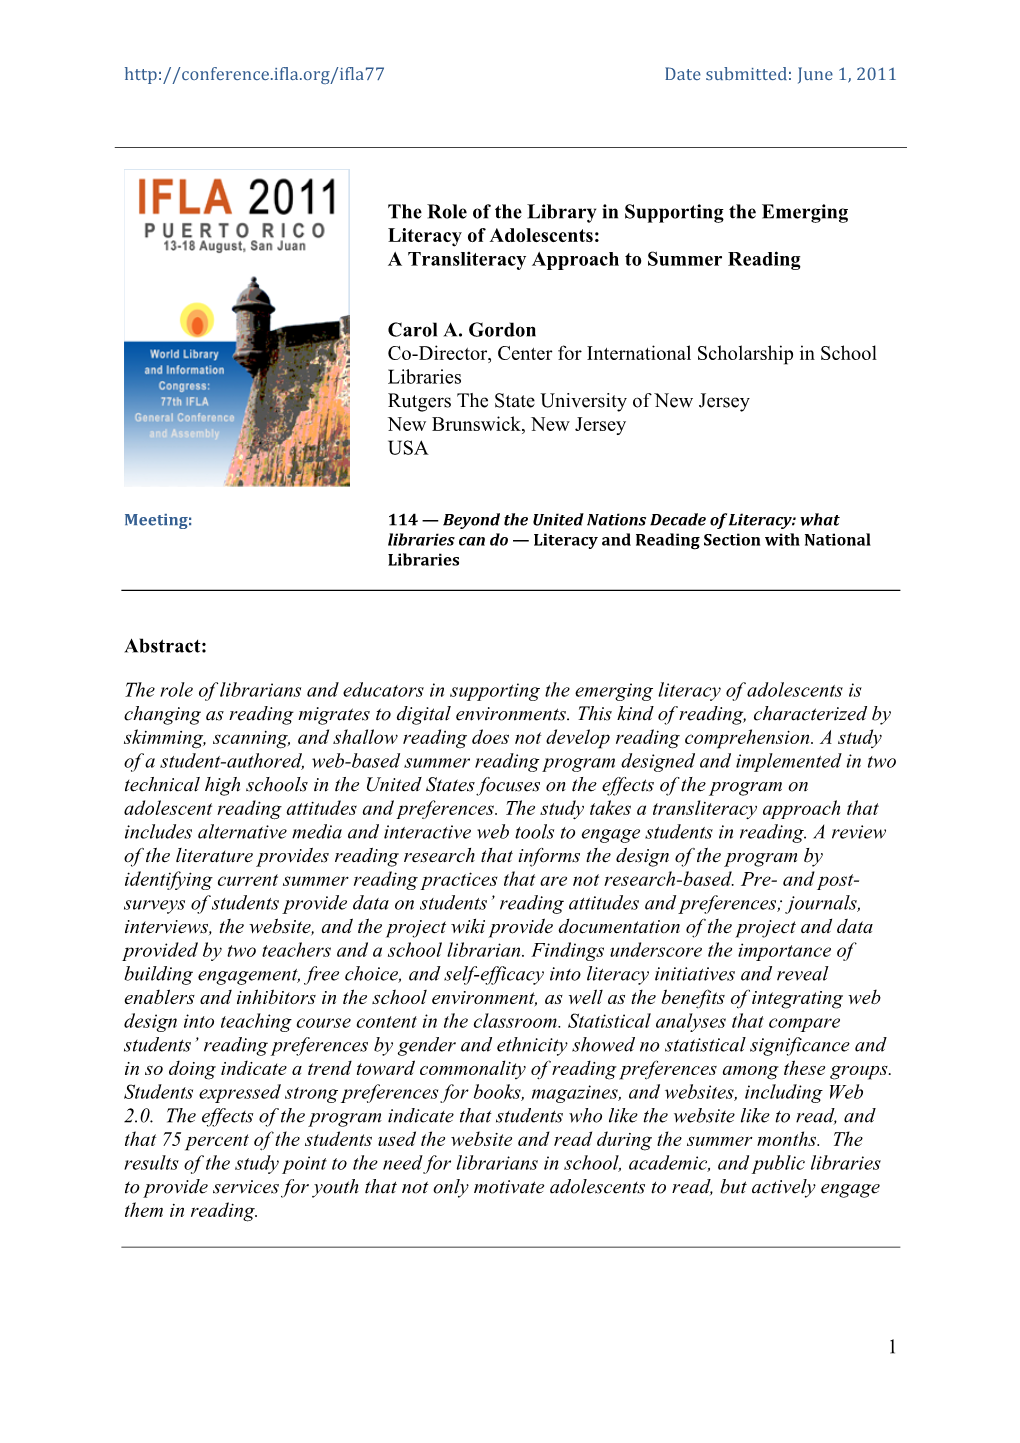 The Role of the Library in Supporting the Emerging Literacy of Adolescents: a Transliteracy Approach to Summer Reading